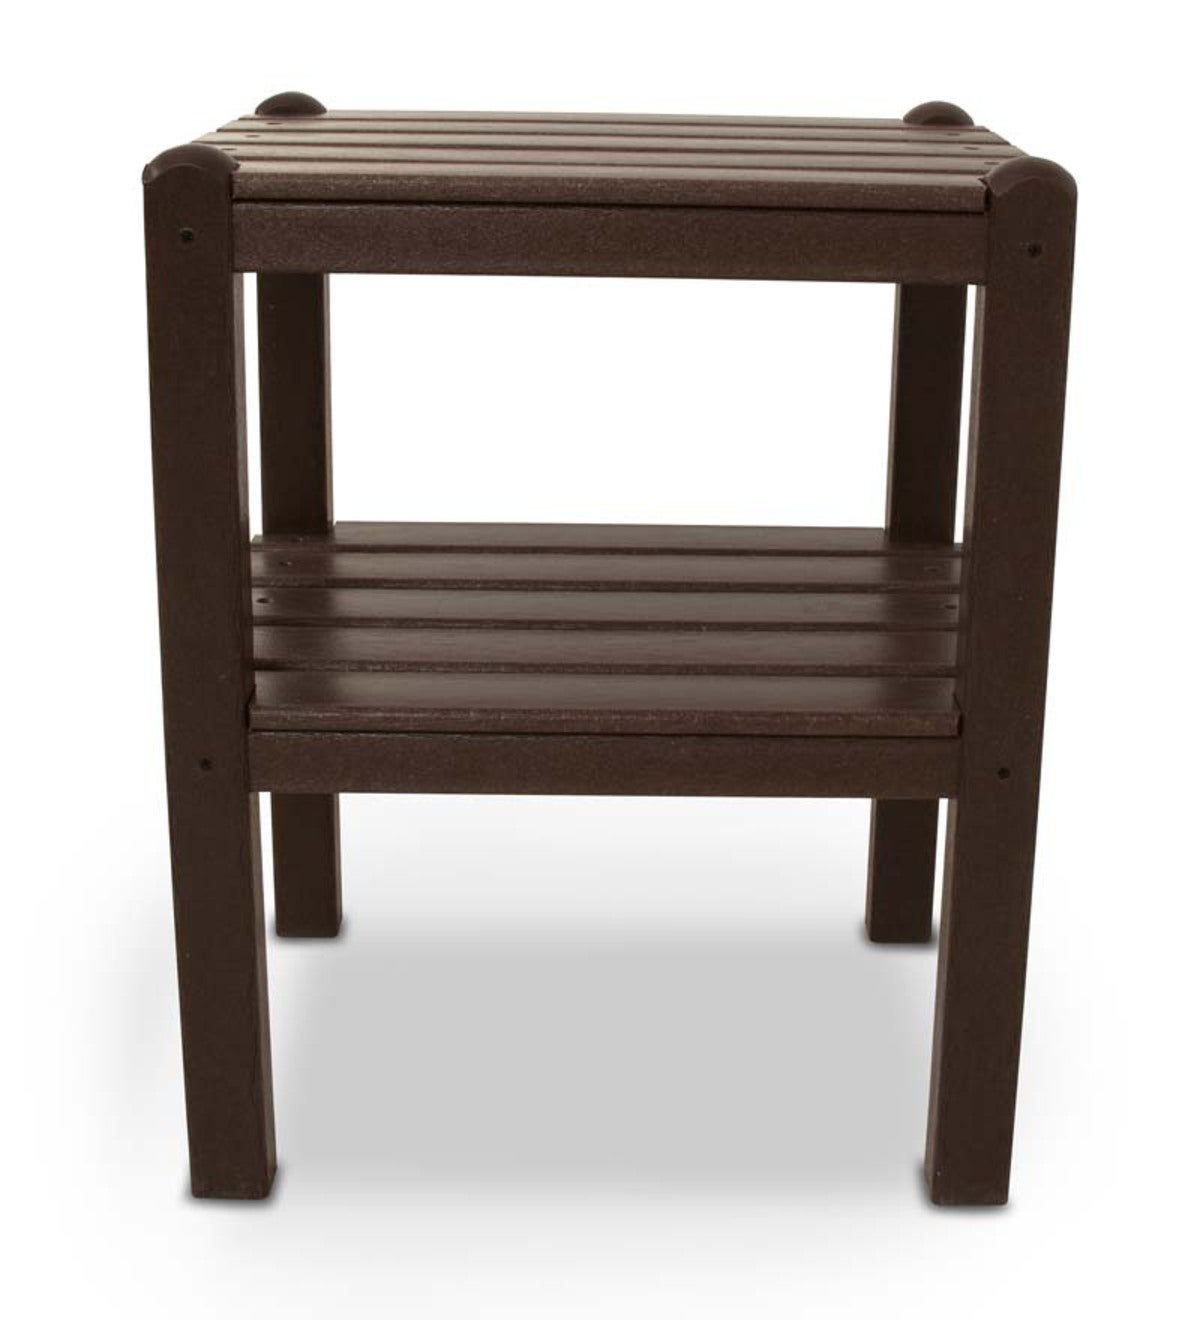 Low-Maintenance American-Made POLYWOOD® 2-Tier Jefferson Accent Table